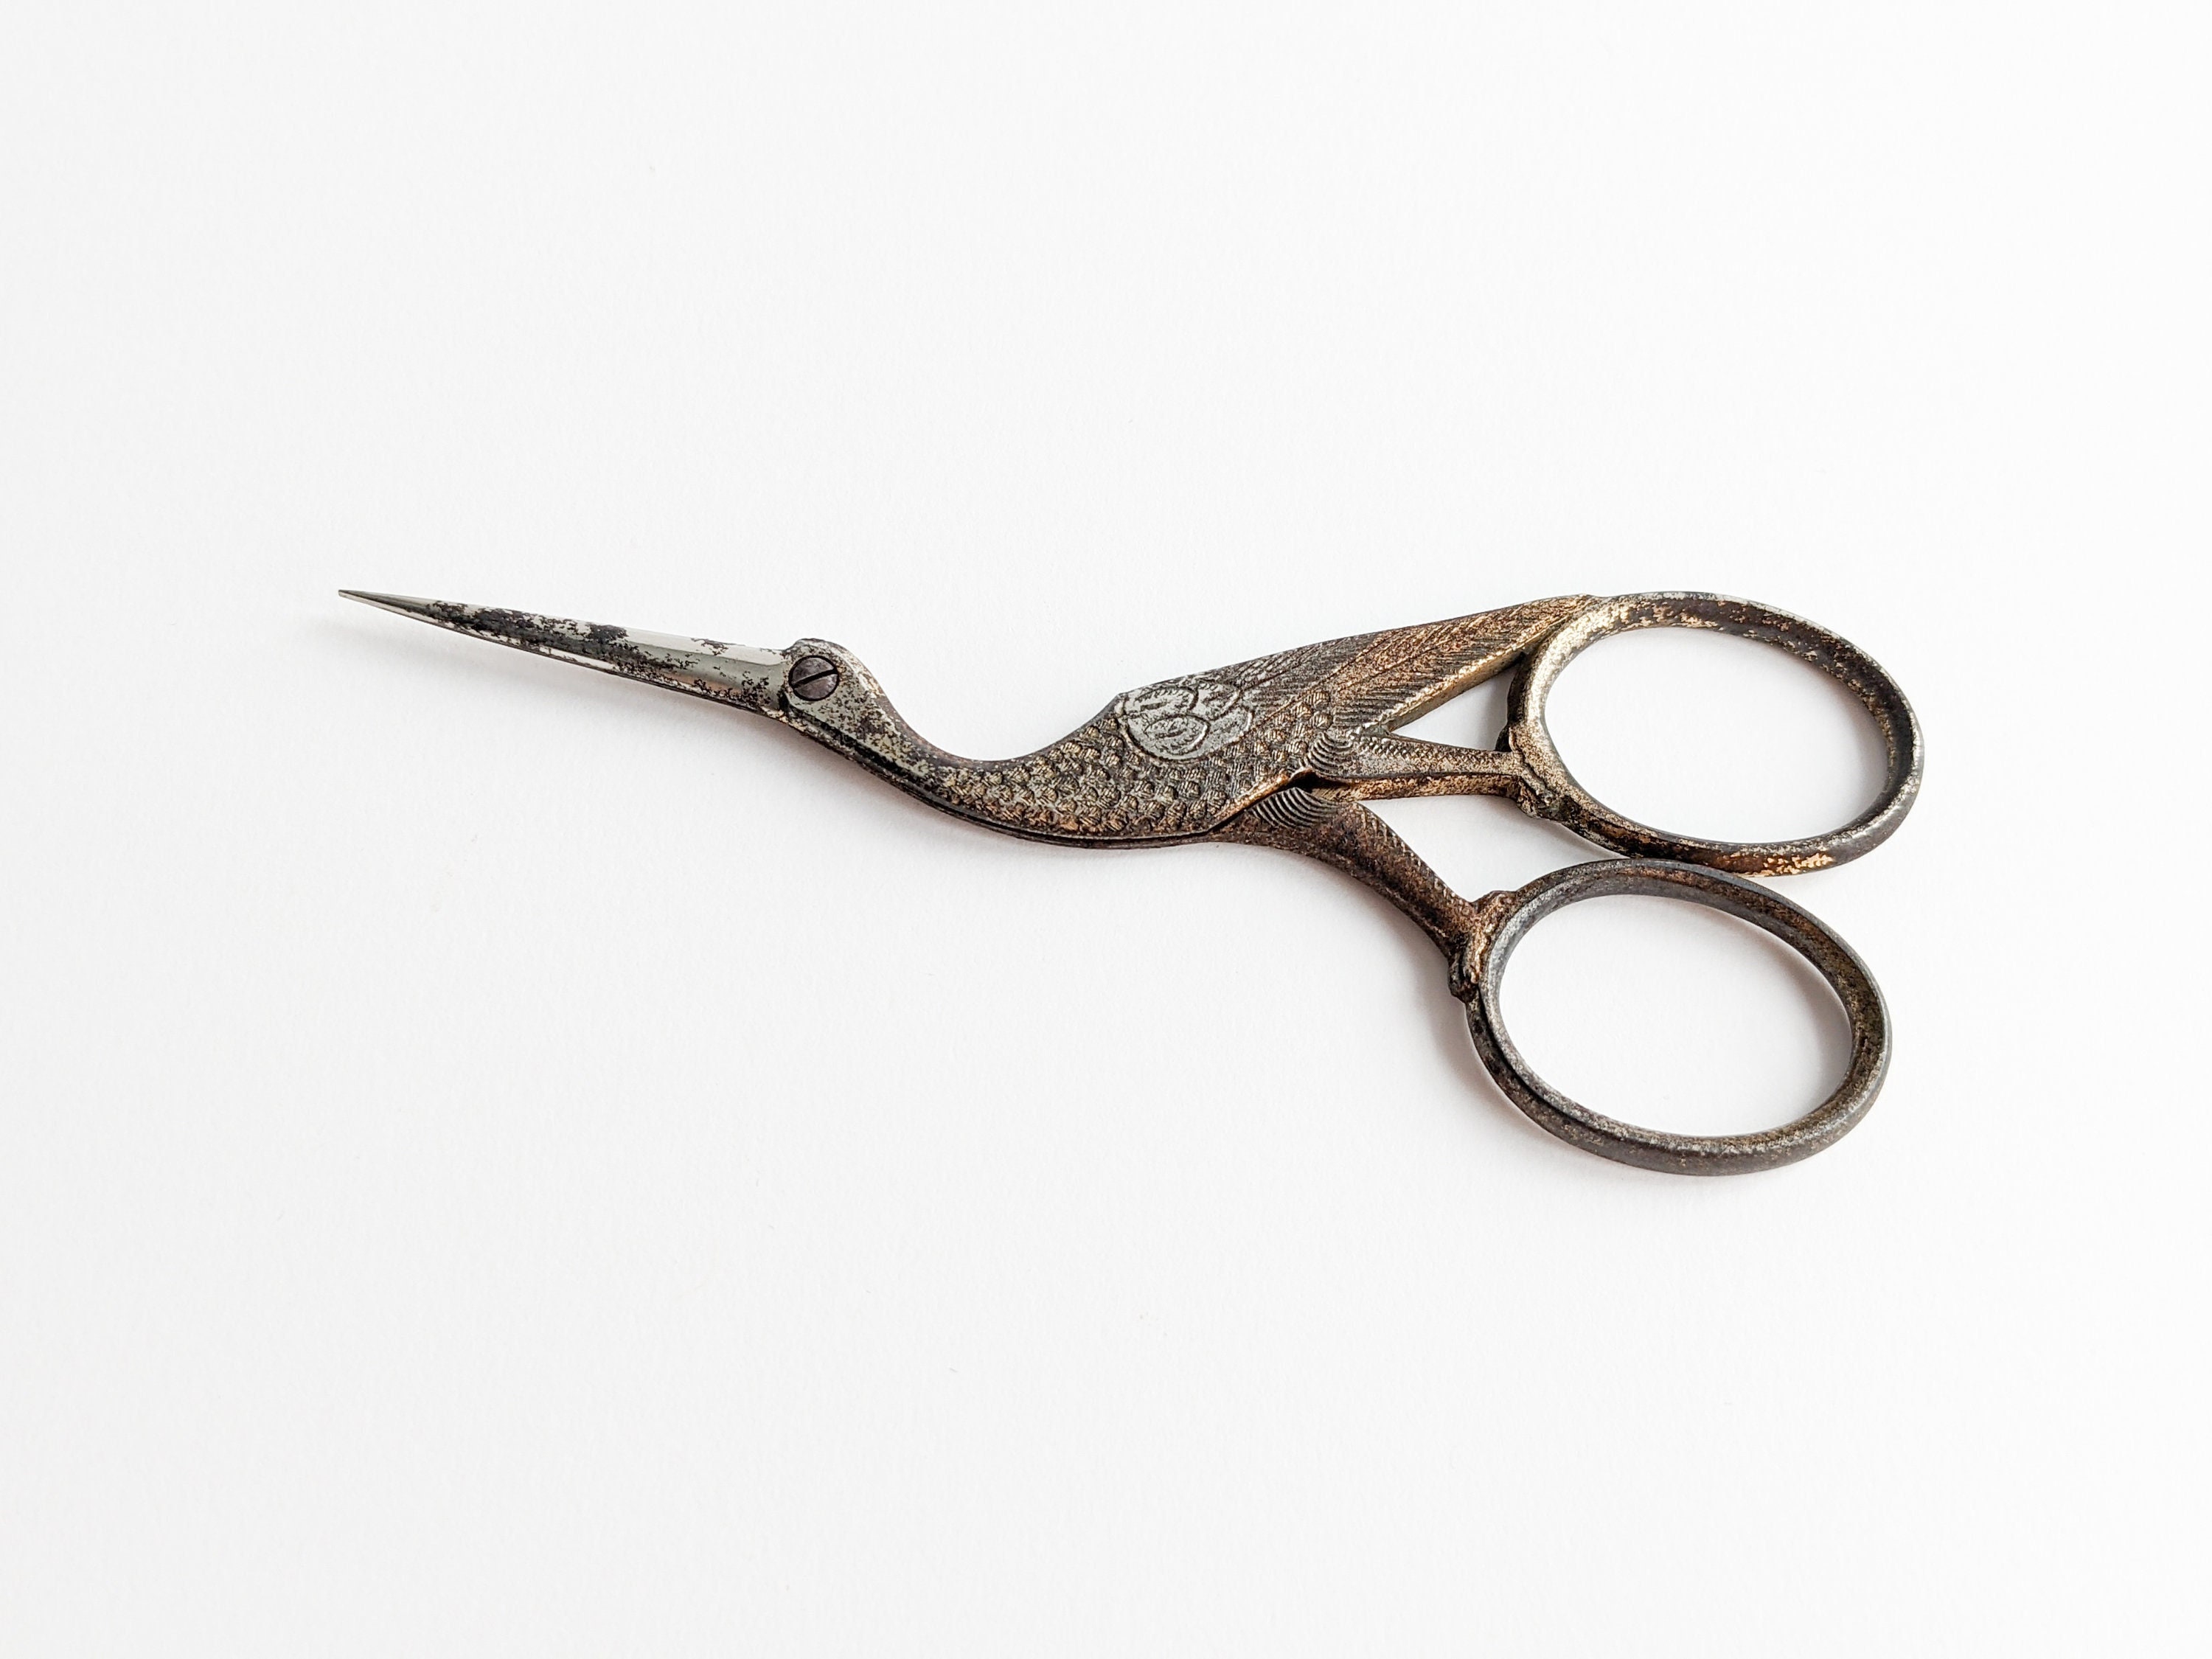 Small Scissors 3.5 Tijeras Embroidery Scissors for Sewing  Gold/bronze/silver Sharp Accessories Vintage Finding Sewing Embroidery 